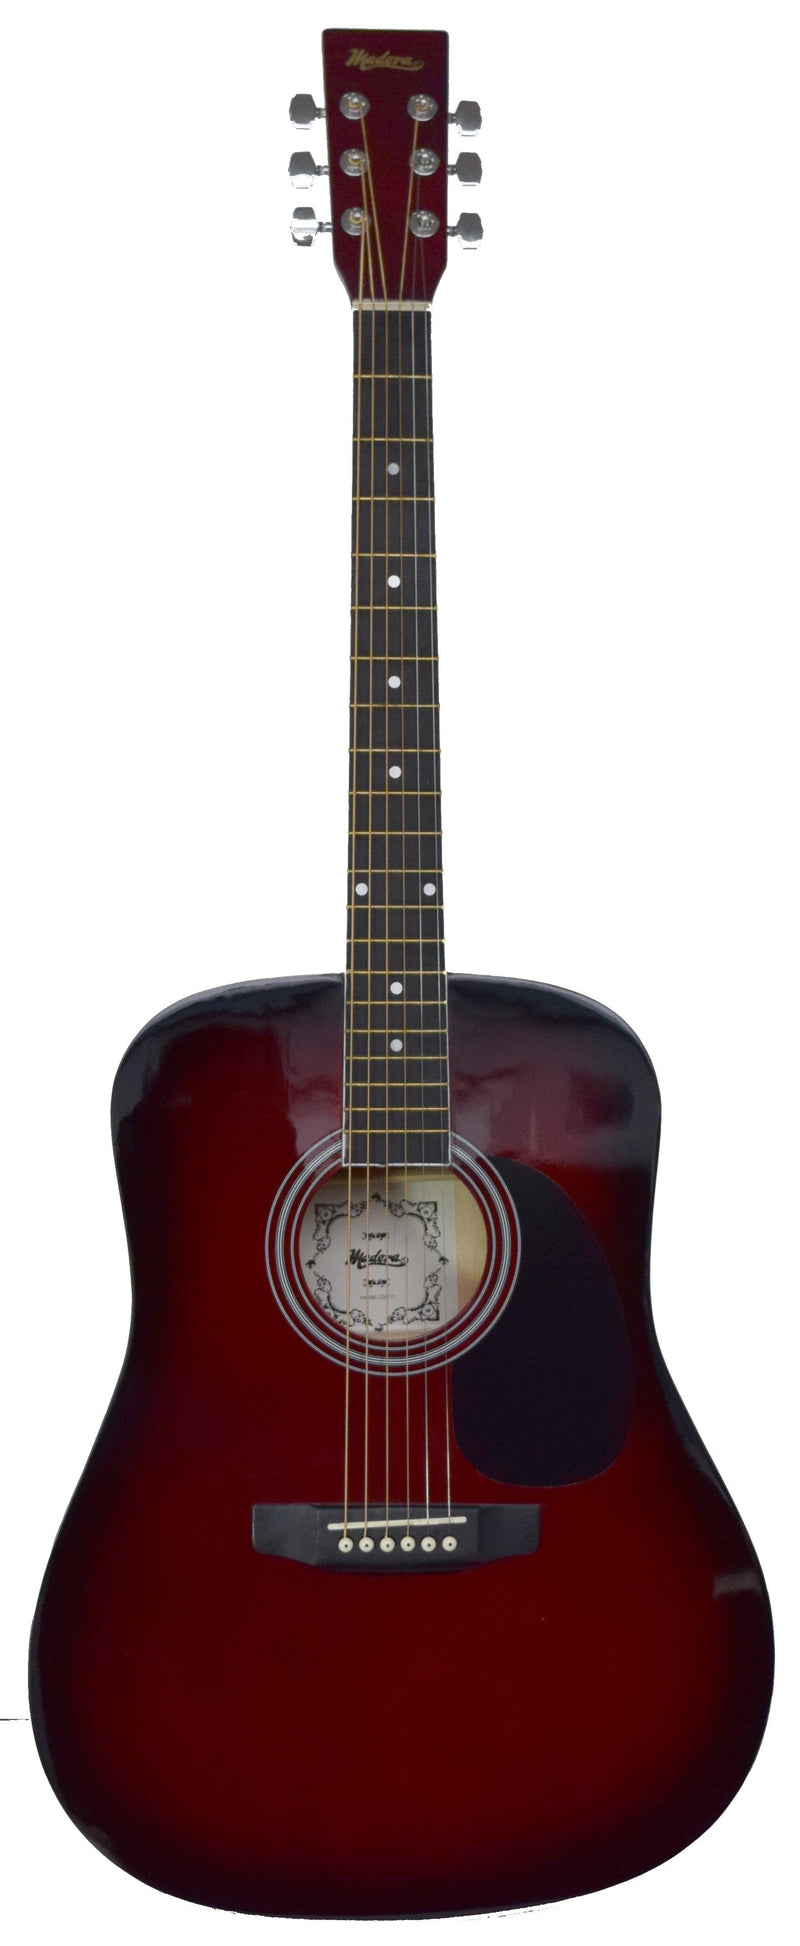 Madera LD411WRS Acoustic Full Size Guitar Wine Red Madera Instrument for sale canada